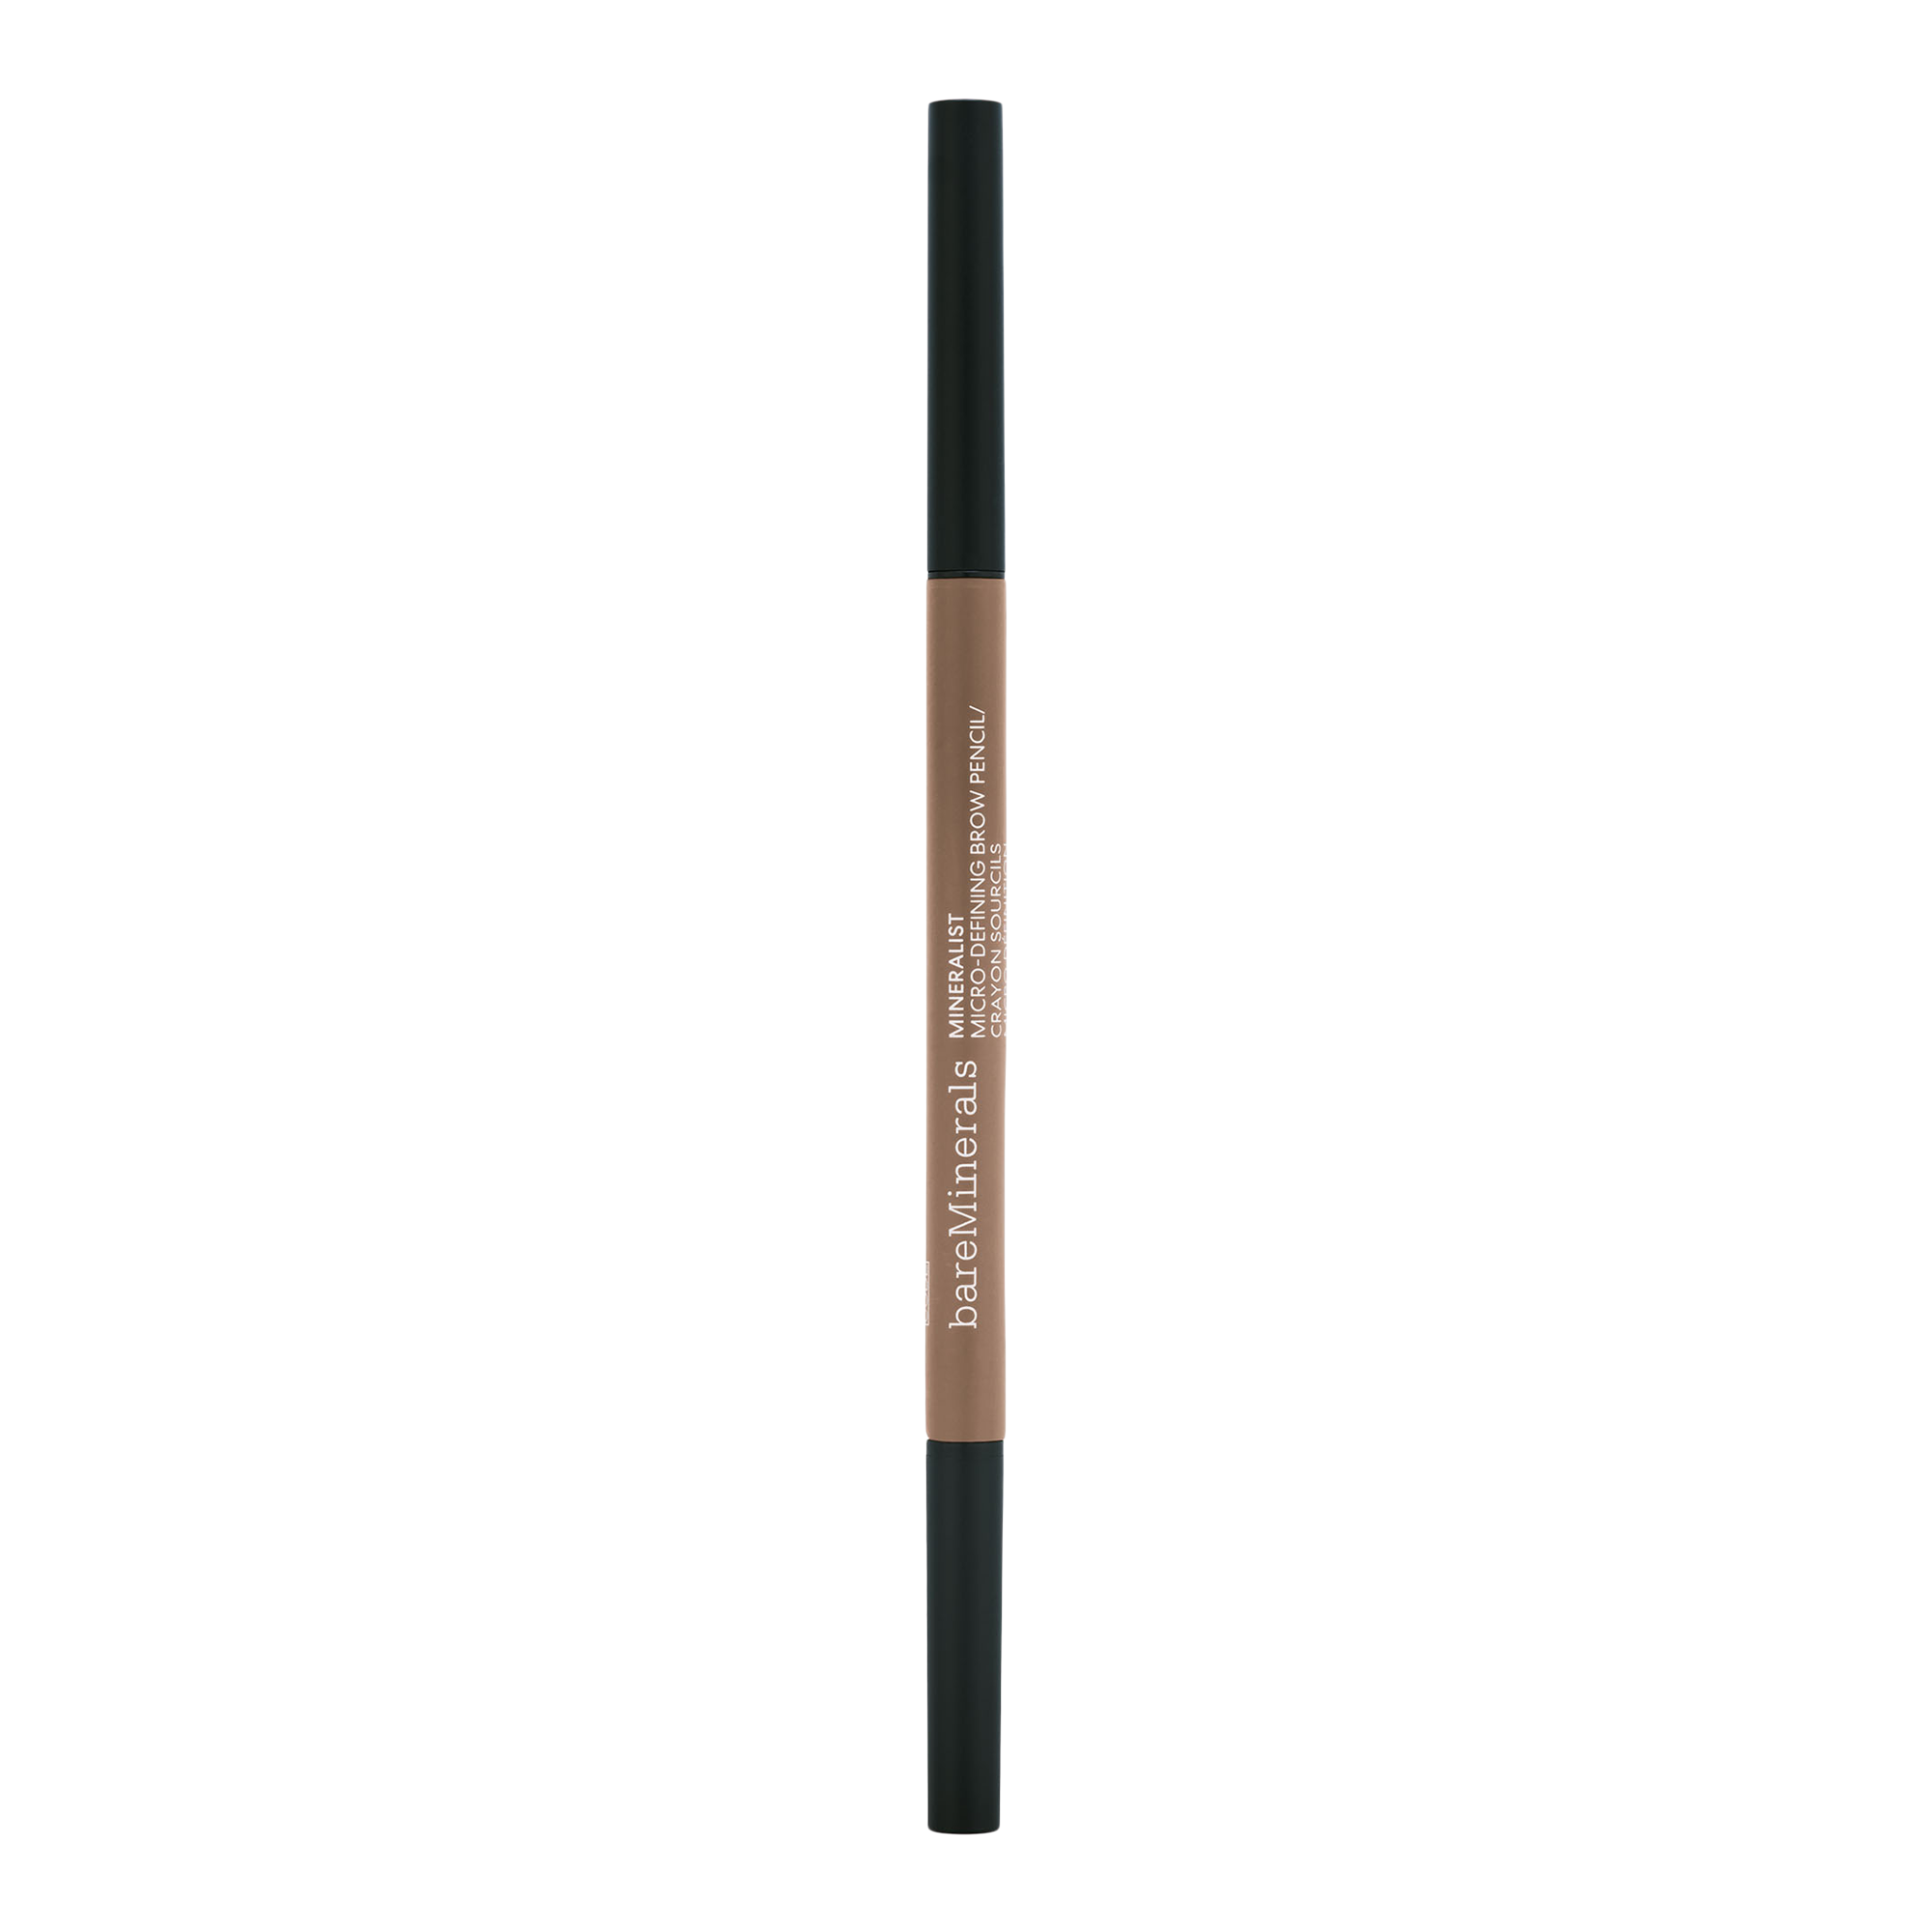 bareMinerals Mineralist Micro-Defining Eyebrow Pencil / TAUPE